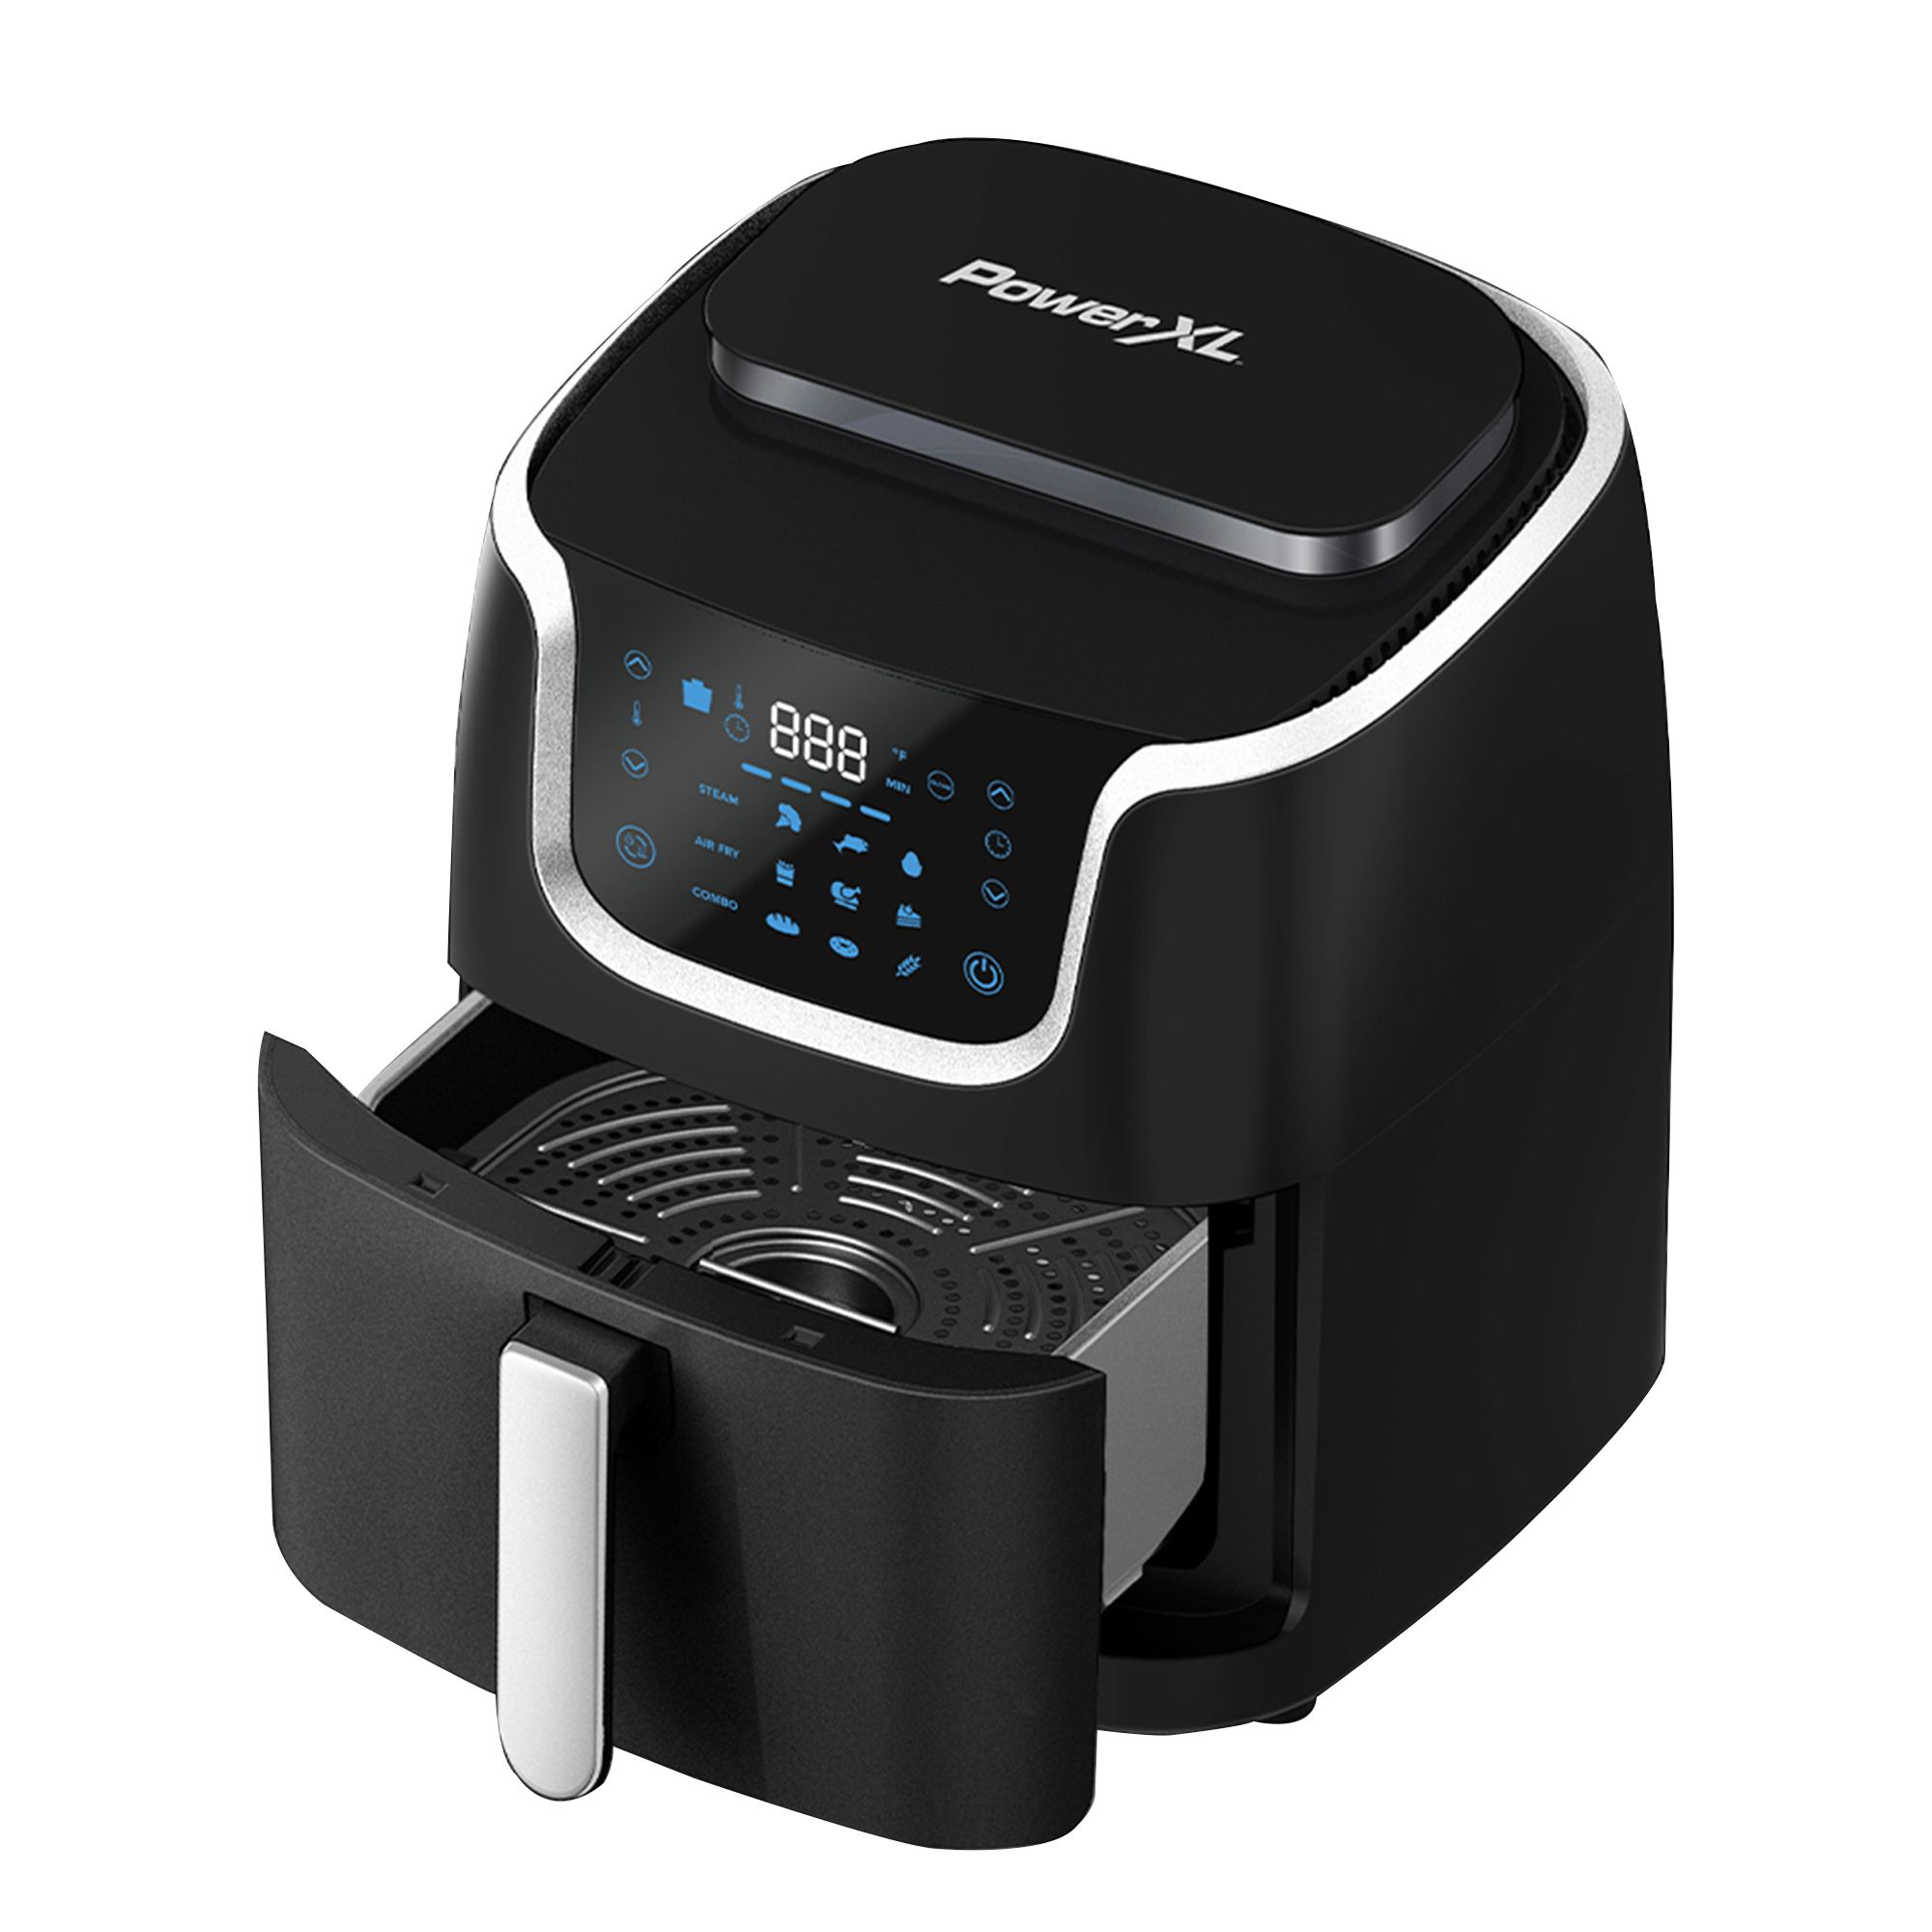 Meet the 7-in-1 Air Fryer Oven by PowerXL 